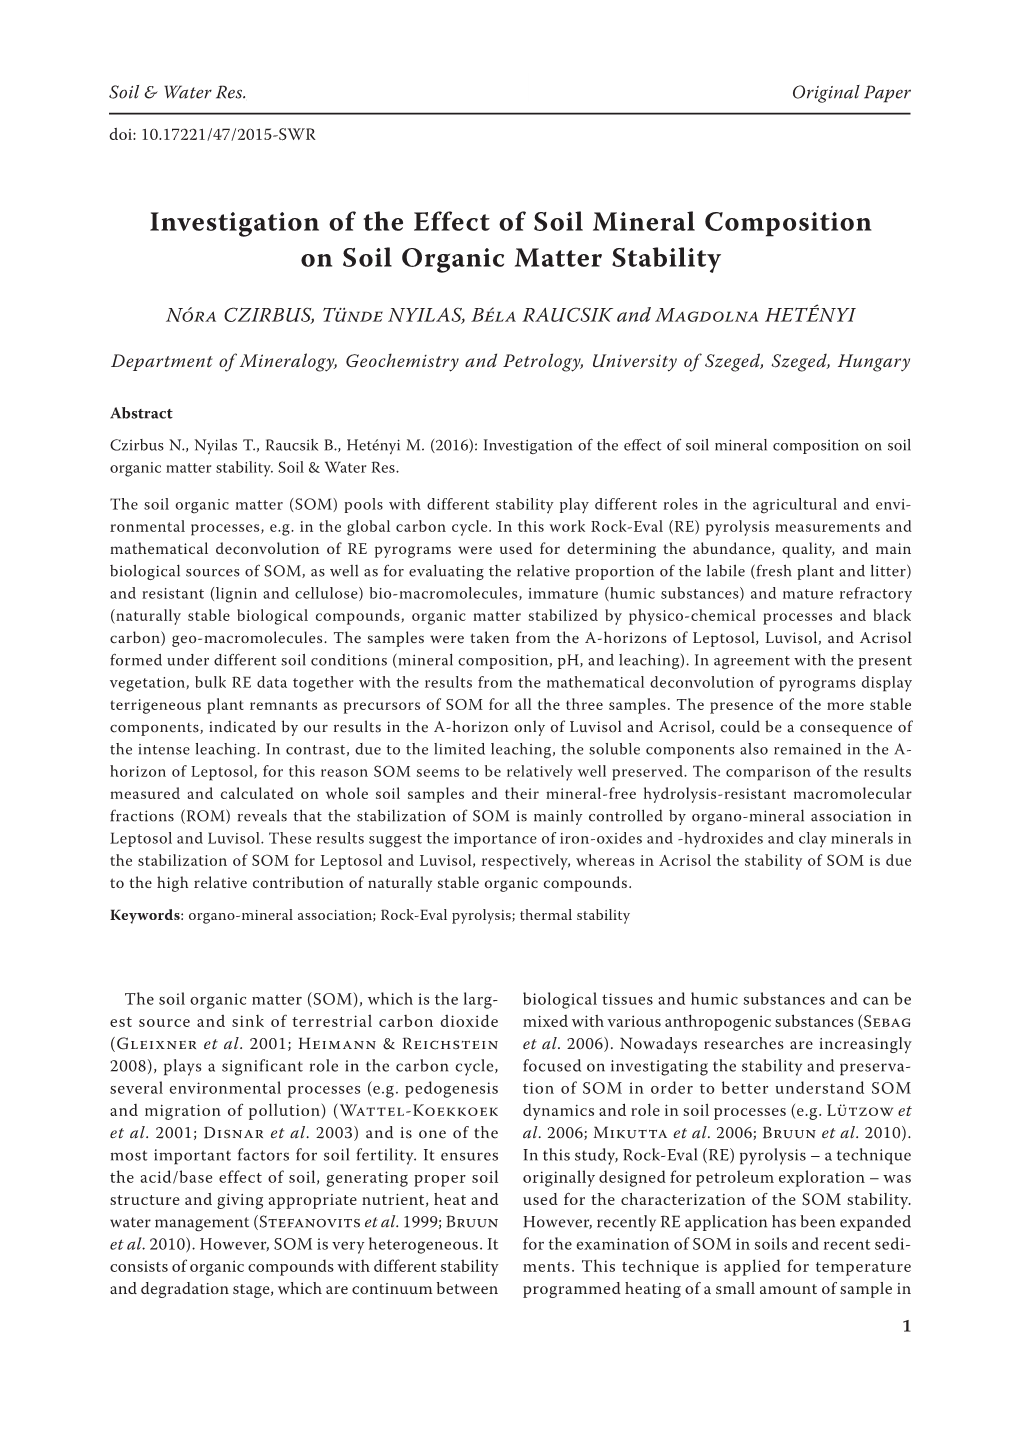 Investigation of the Effect of Soil Mineral Composition on Soil Organic Matter Stability